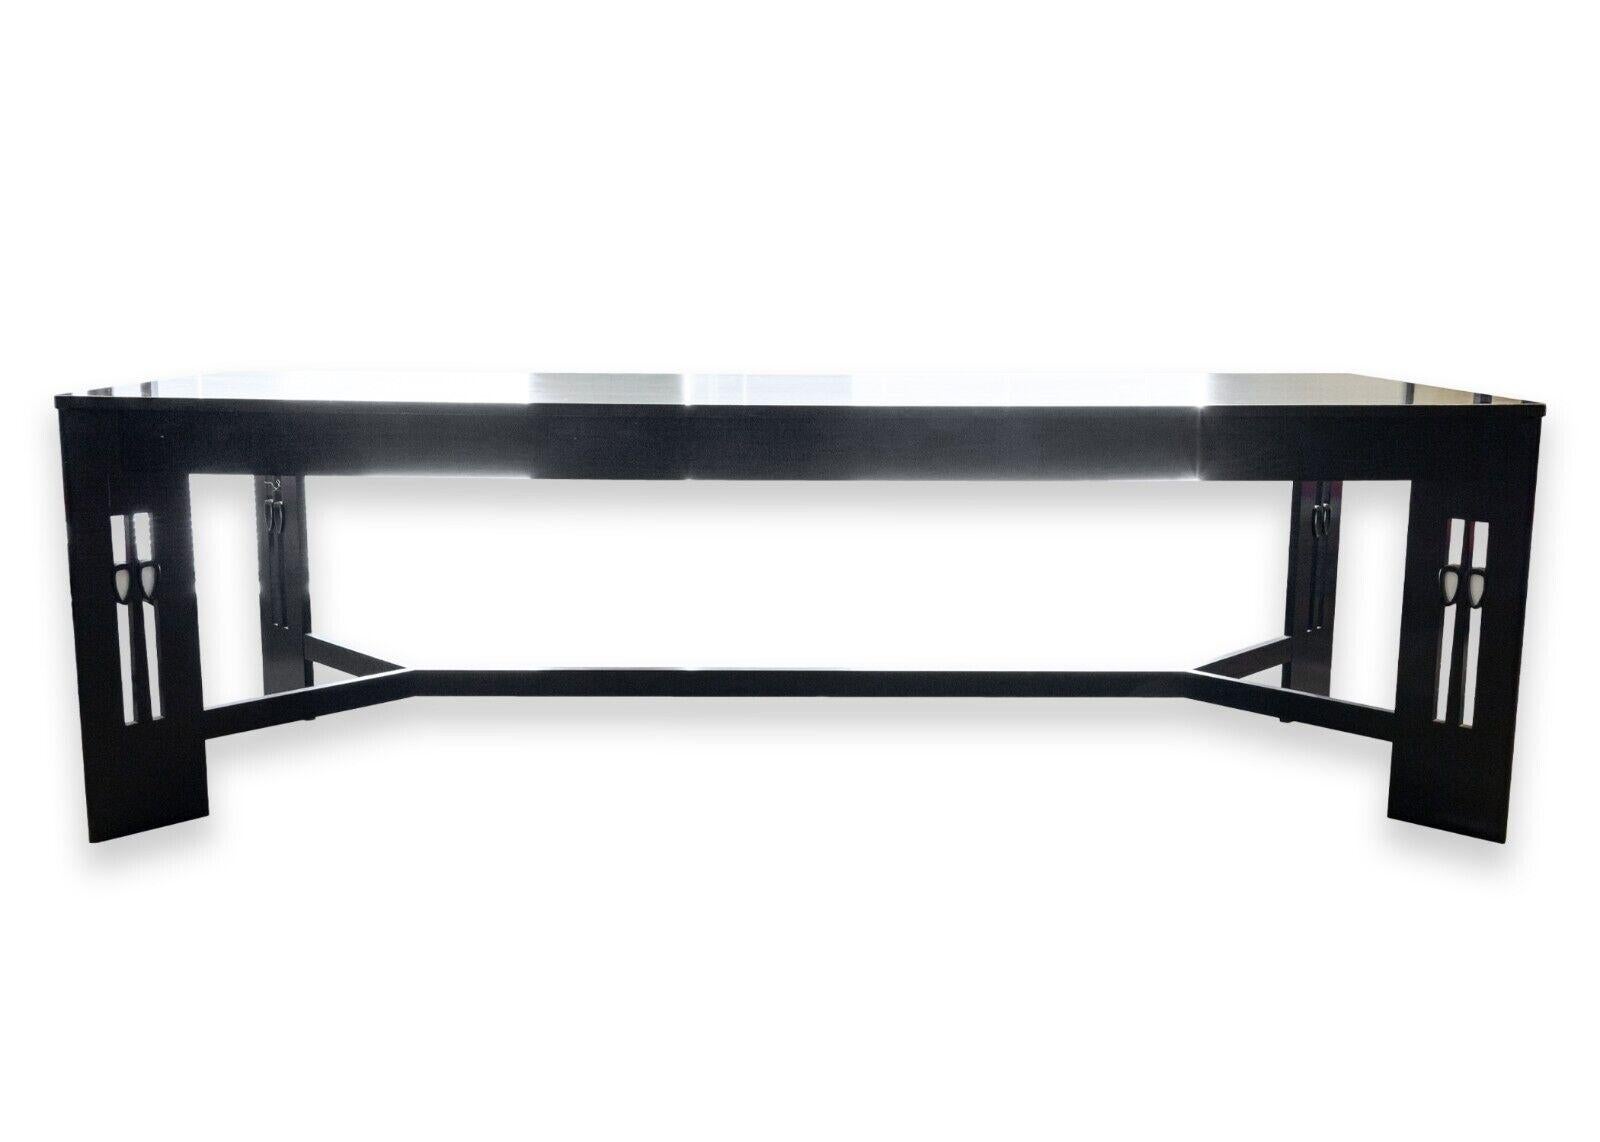 A Charles Rennie Mackintosh black ebonized wood dining table. A gorgeous dining table with a distinct design. This piece designed by Mackintosh features a beautiful black wood construction with lovely wood grain, four slanted legs with diamond